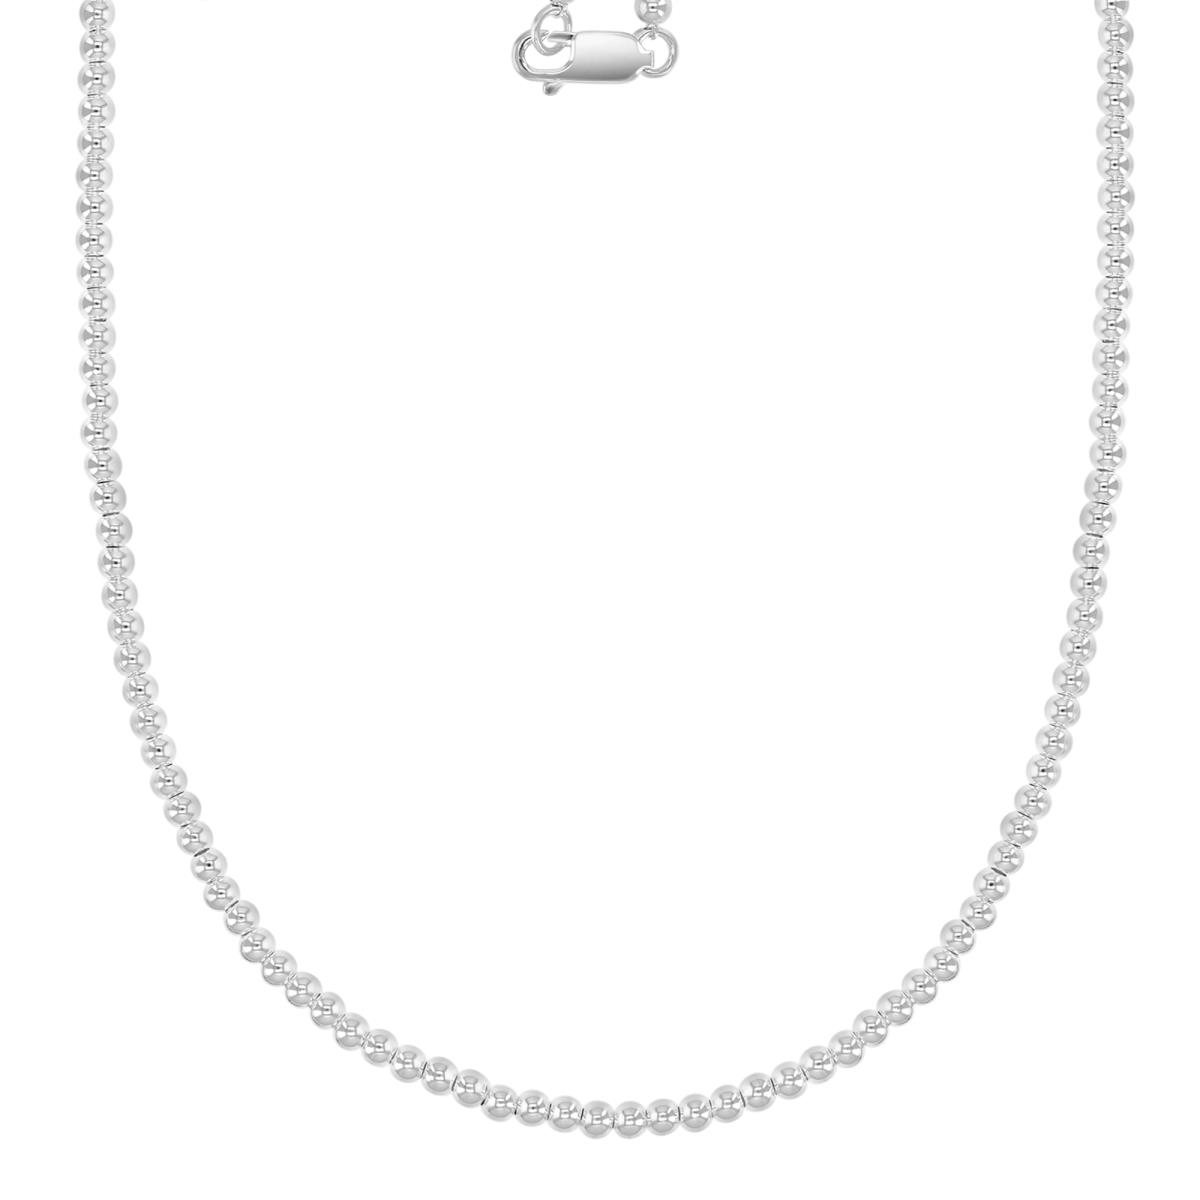 Sterling Silver Anti-Tarnish 3MM Polished Bead Link 20" Chain Necklace